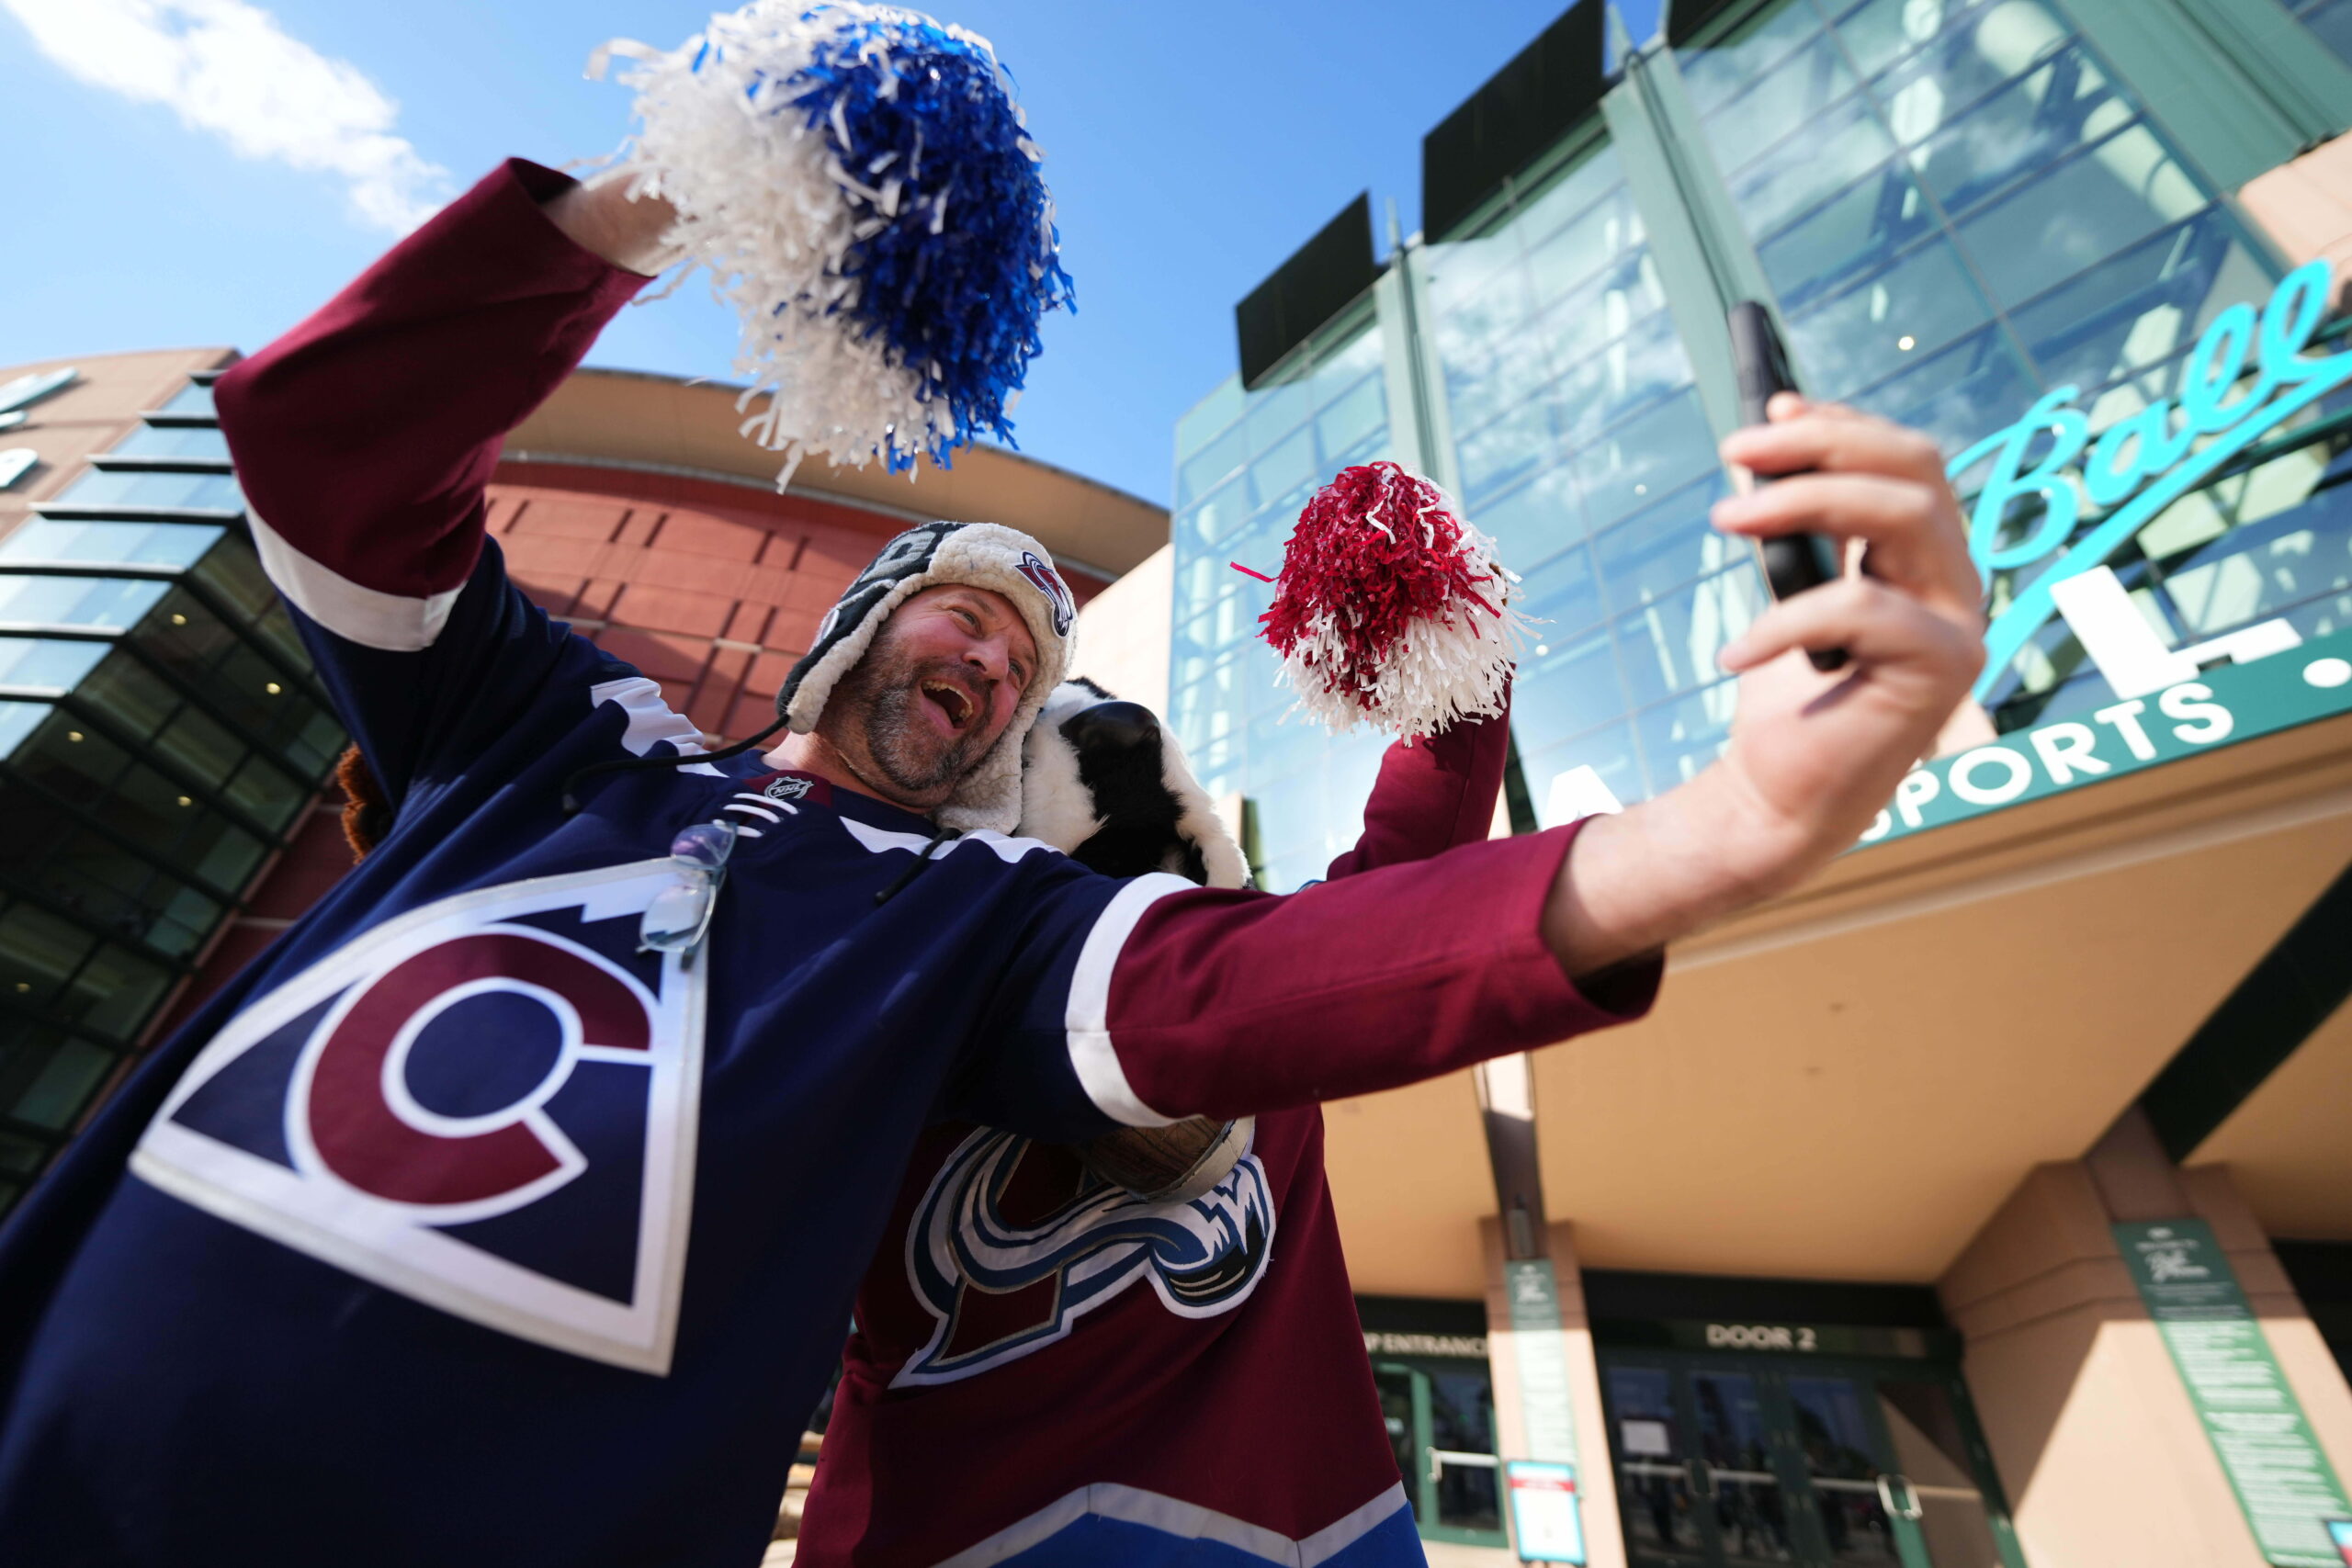 As the Colorado Avalanche get ready for the Stanley Cup Final, fans old and new step in to keep tradition alive